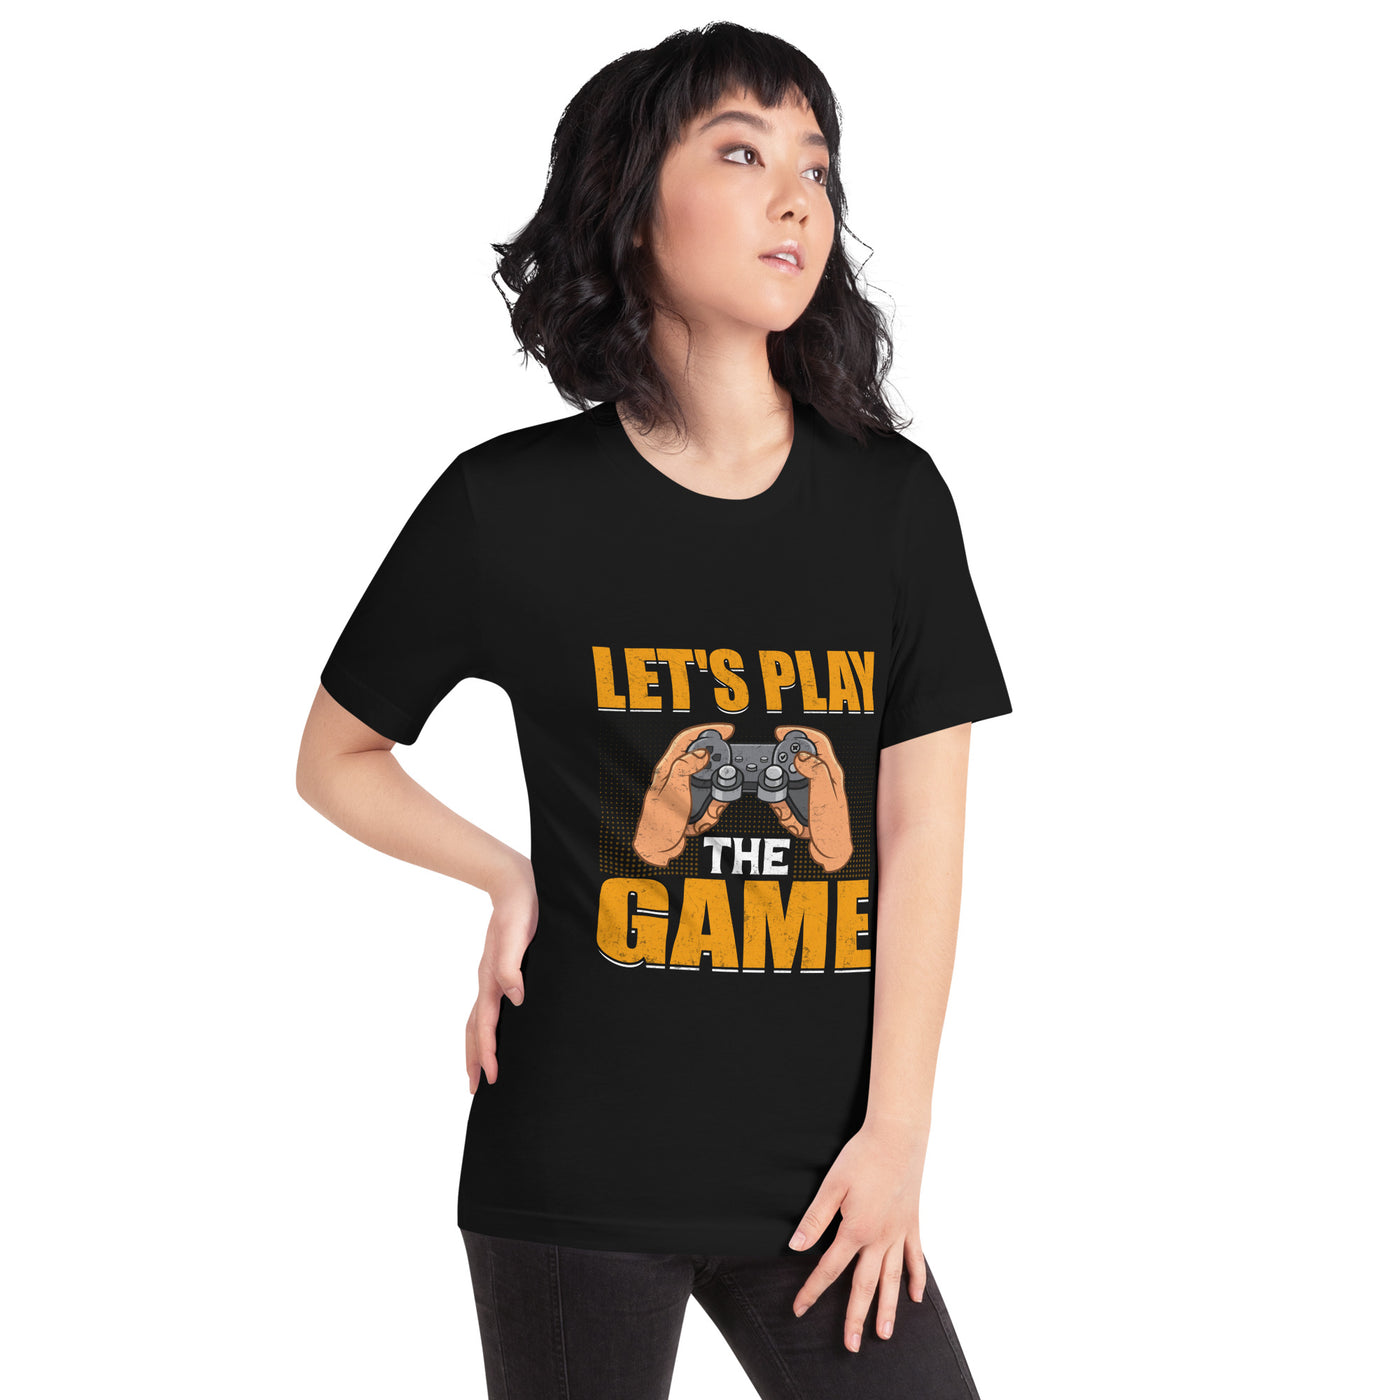 Let's Play the Game - Unisex t-shirt